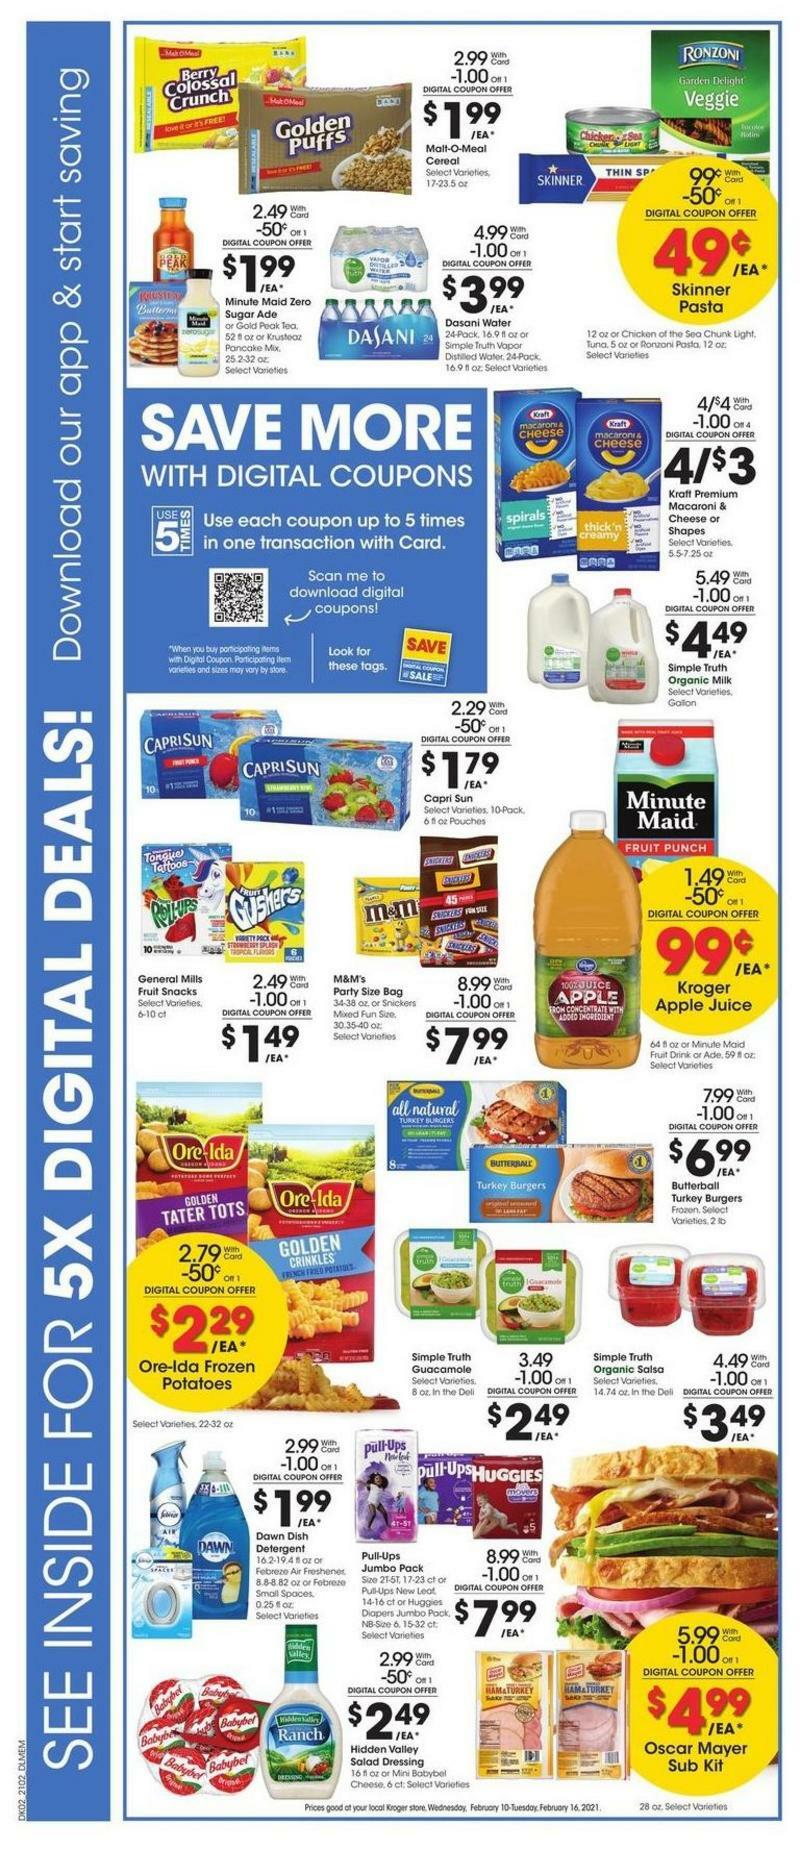 Kroger Weekly Ad from February 10